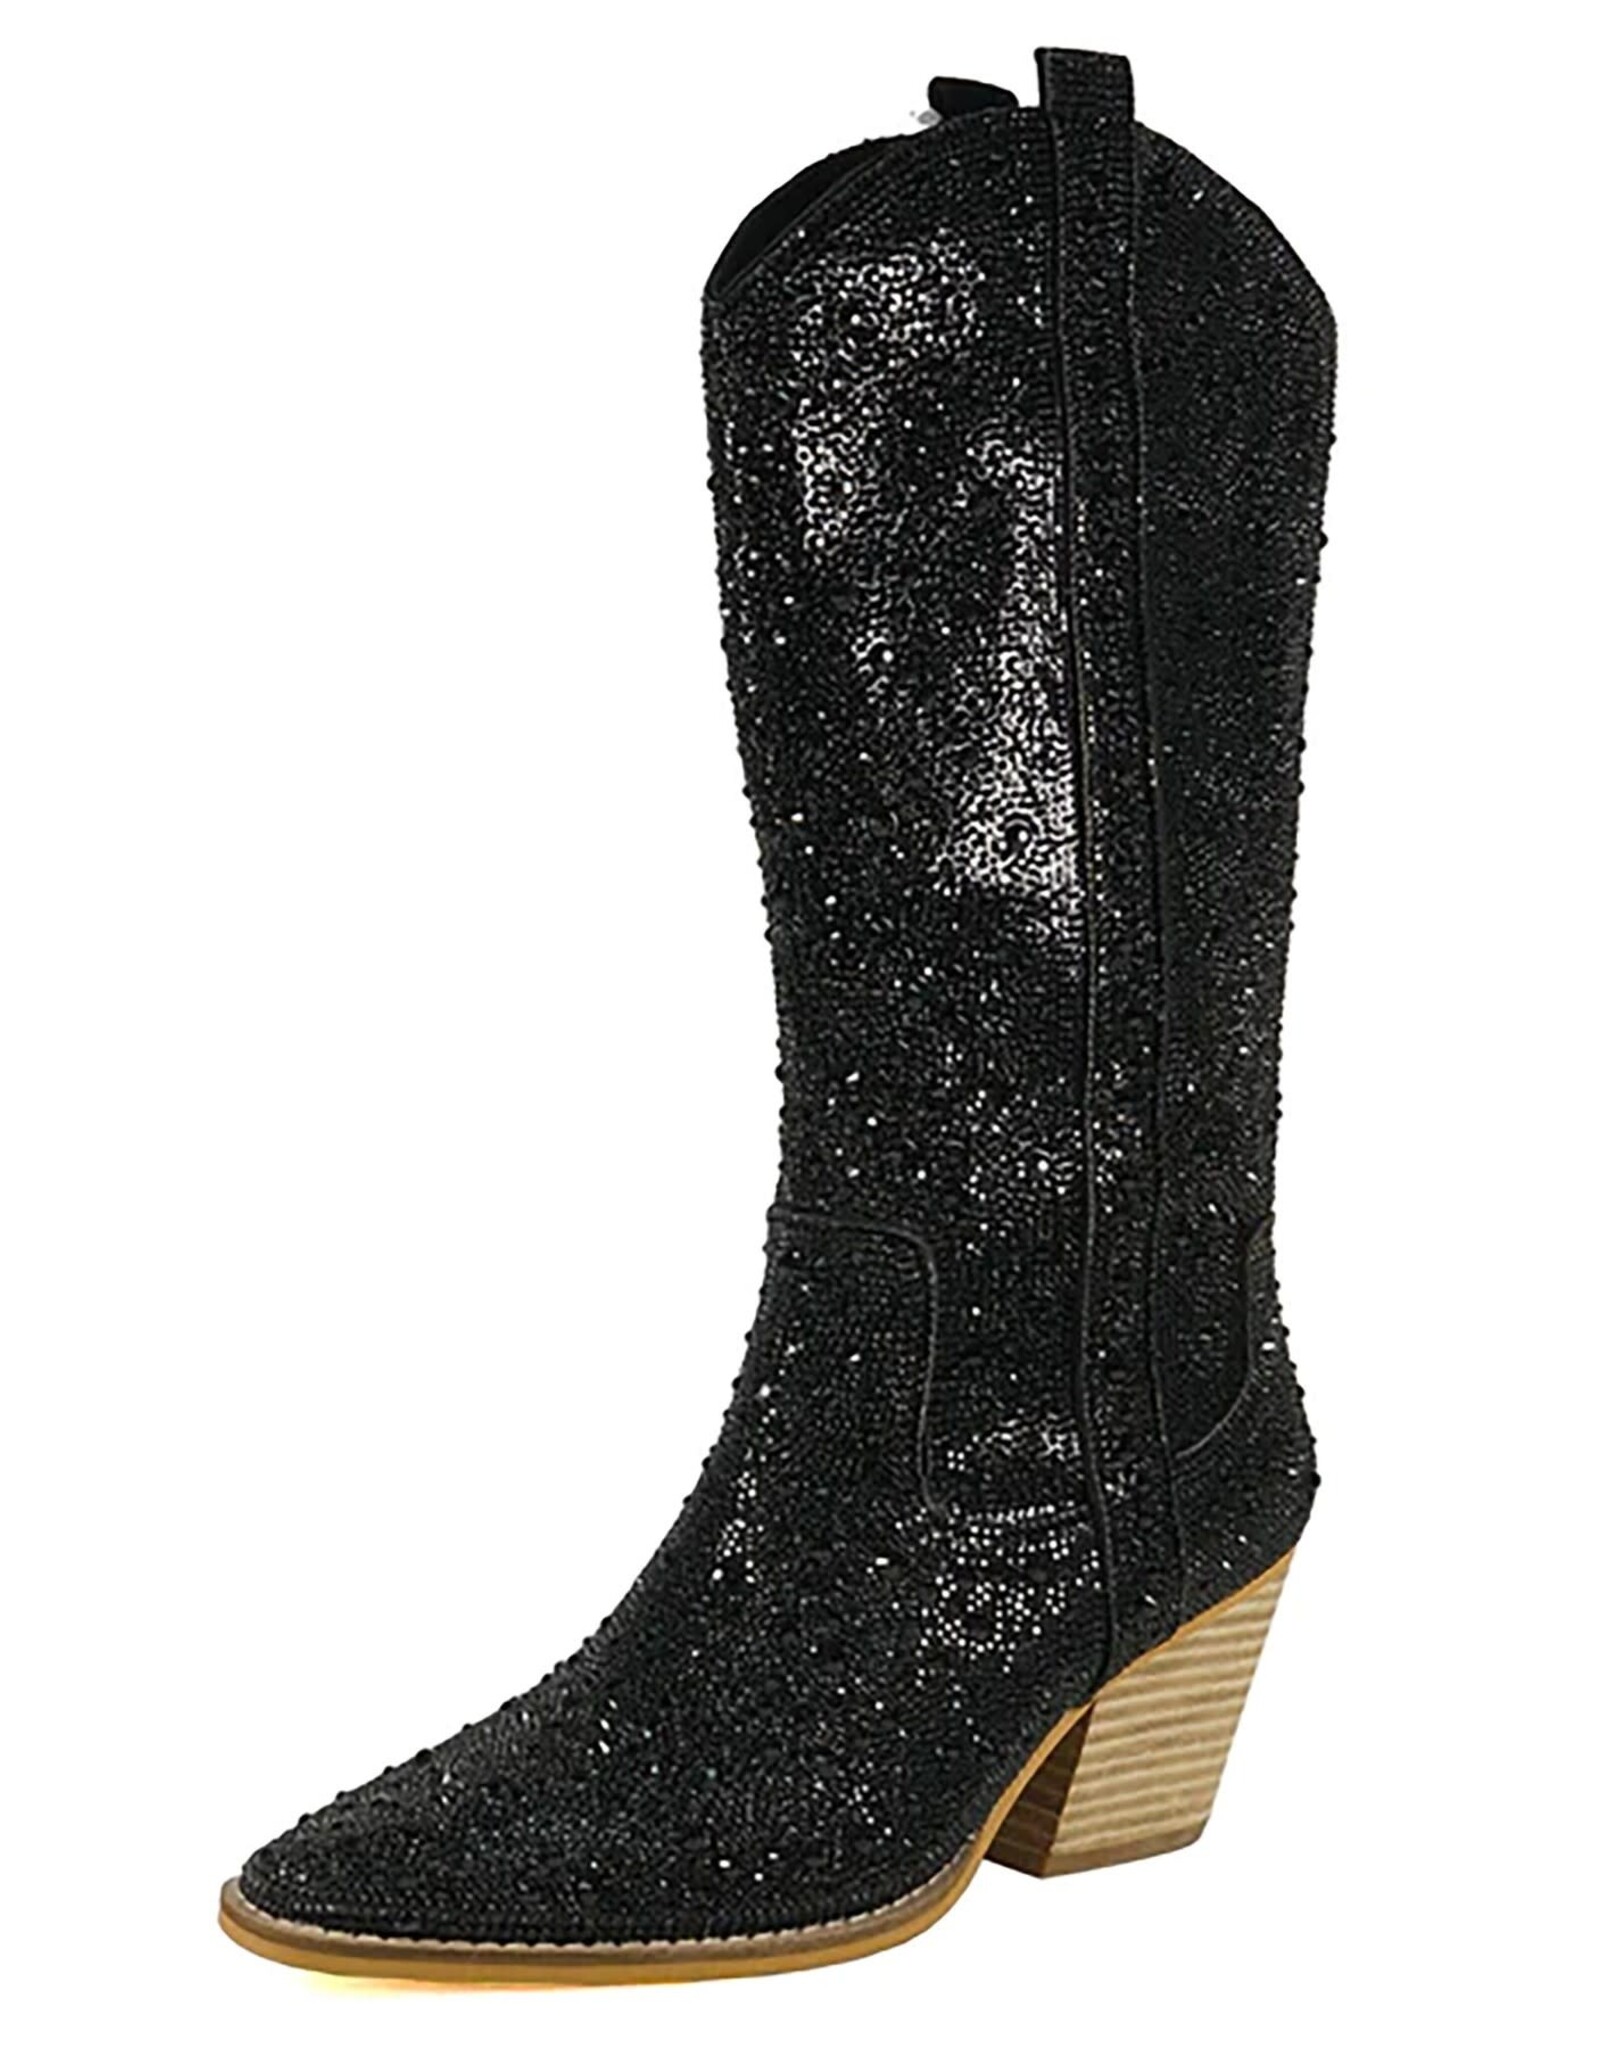 Let's See Style Alice 15 extended knee height rhinestone western boot (Black)